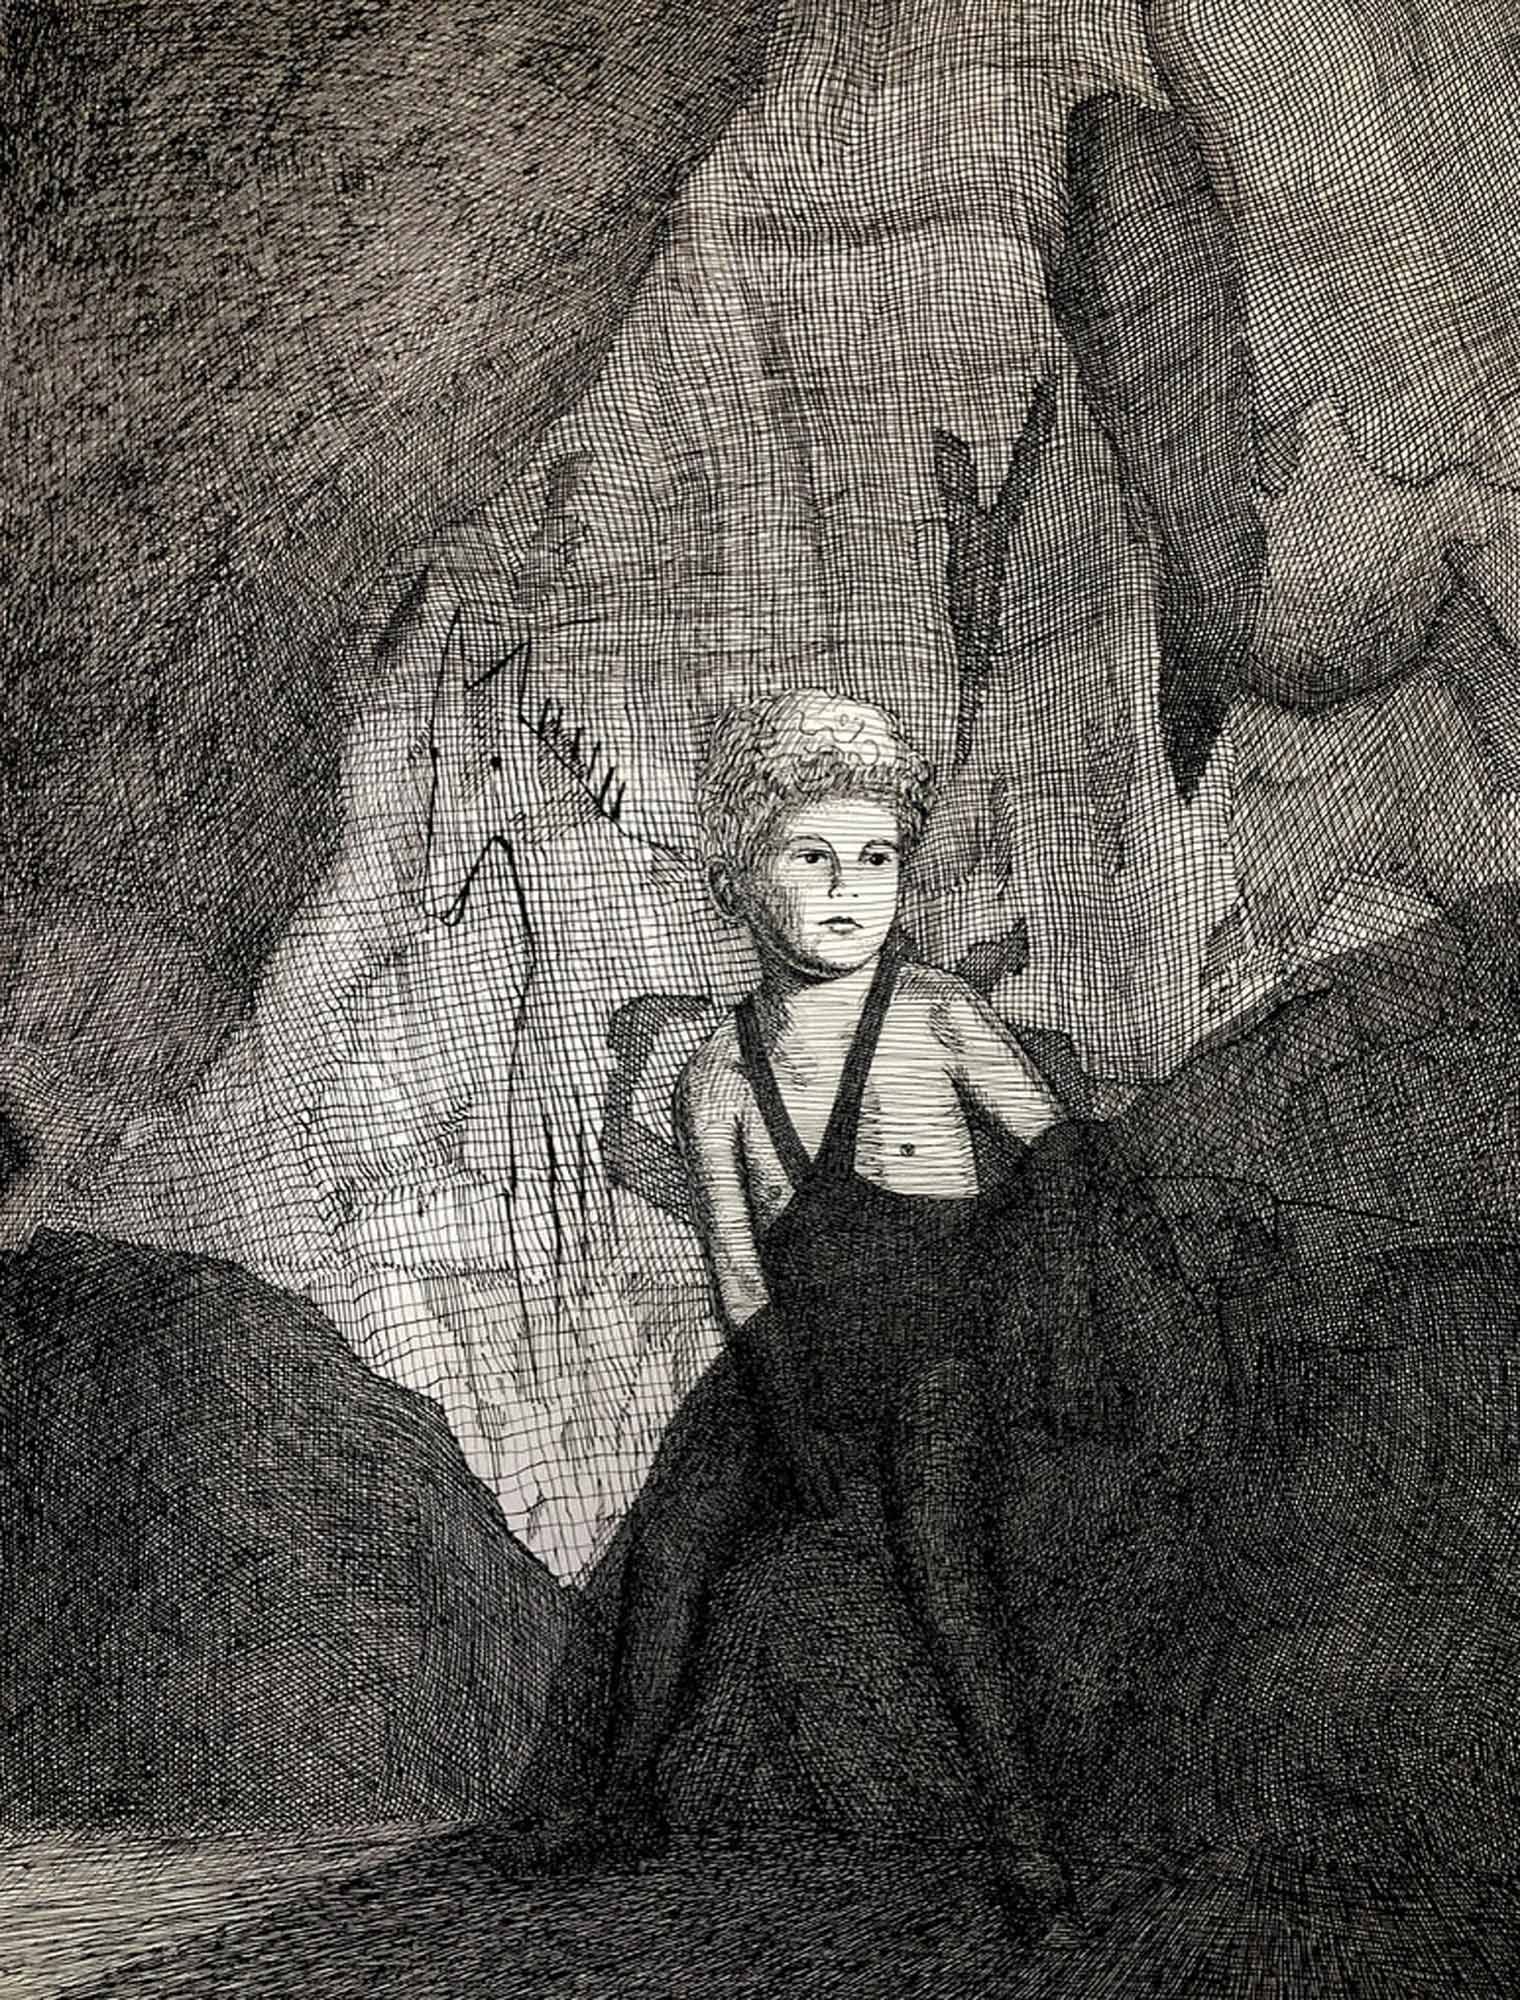 Mark Alexander's ink artwork: Young boy standing contemplatively in a textured cave.